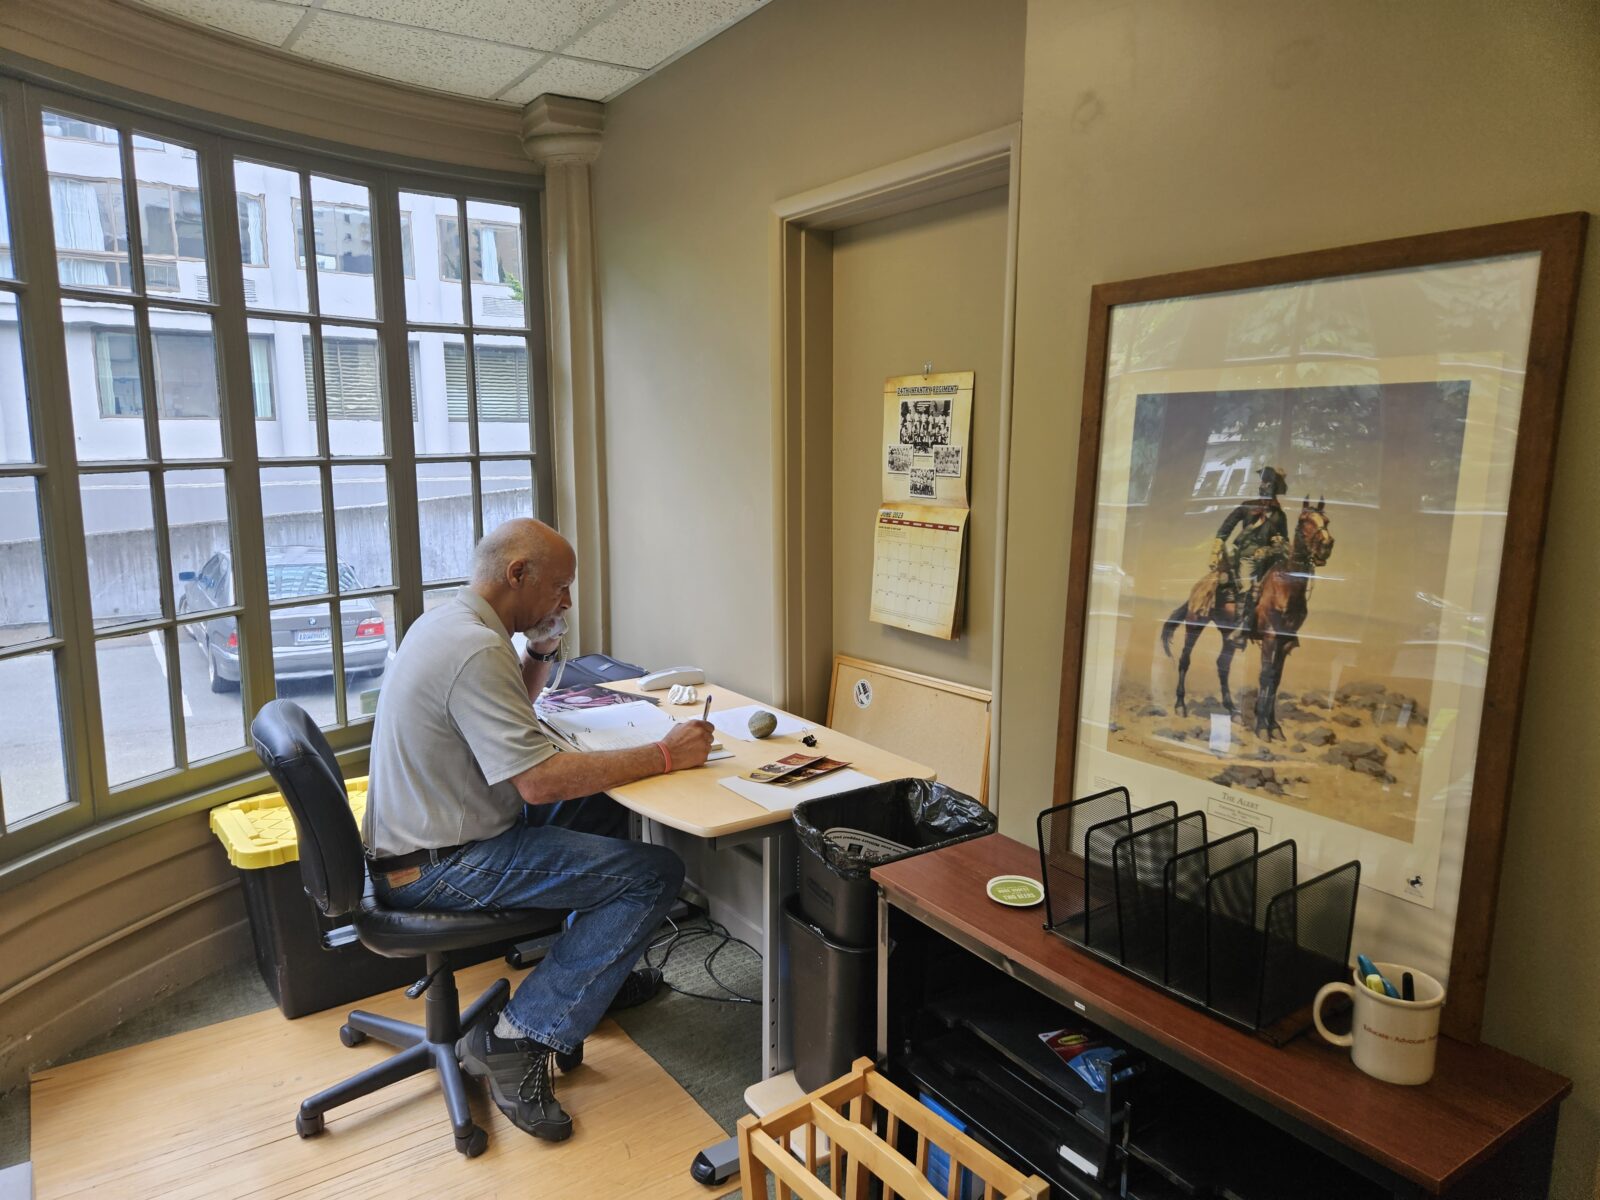 A man is sitting at a table reading a document. He is wearing a grey shirt, blue jeans and sneakers. To his left is a large window with many window panes. To his right is a print of a Buffalo Soldier in a landscape. The picture is on a desk leaning against a wall.